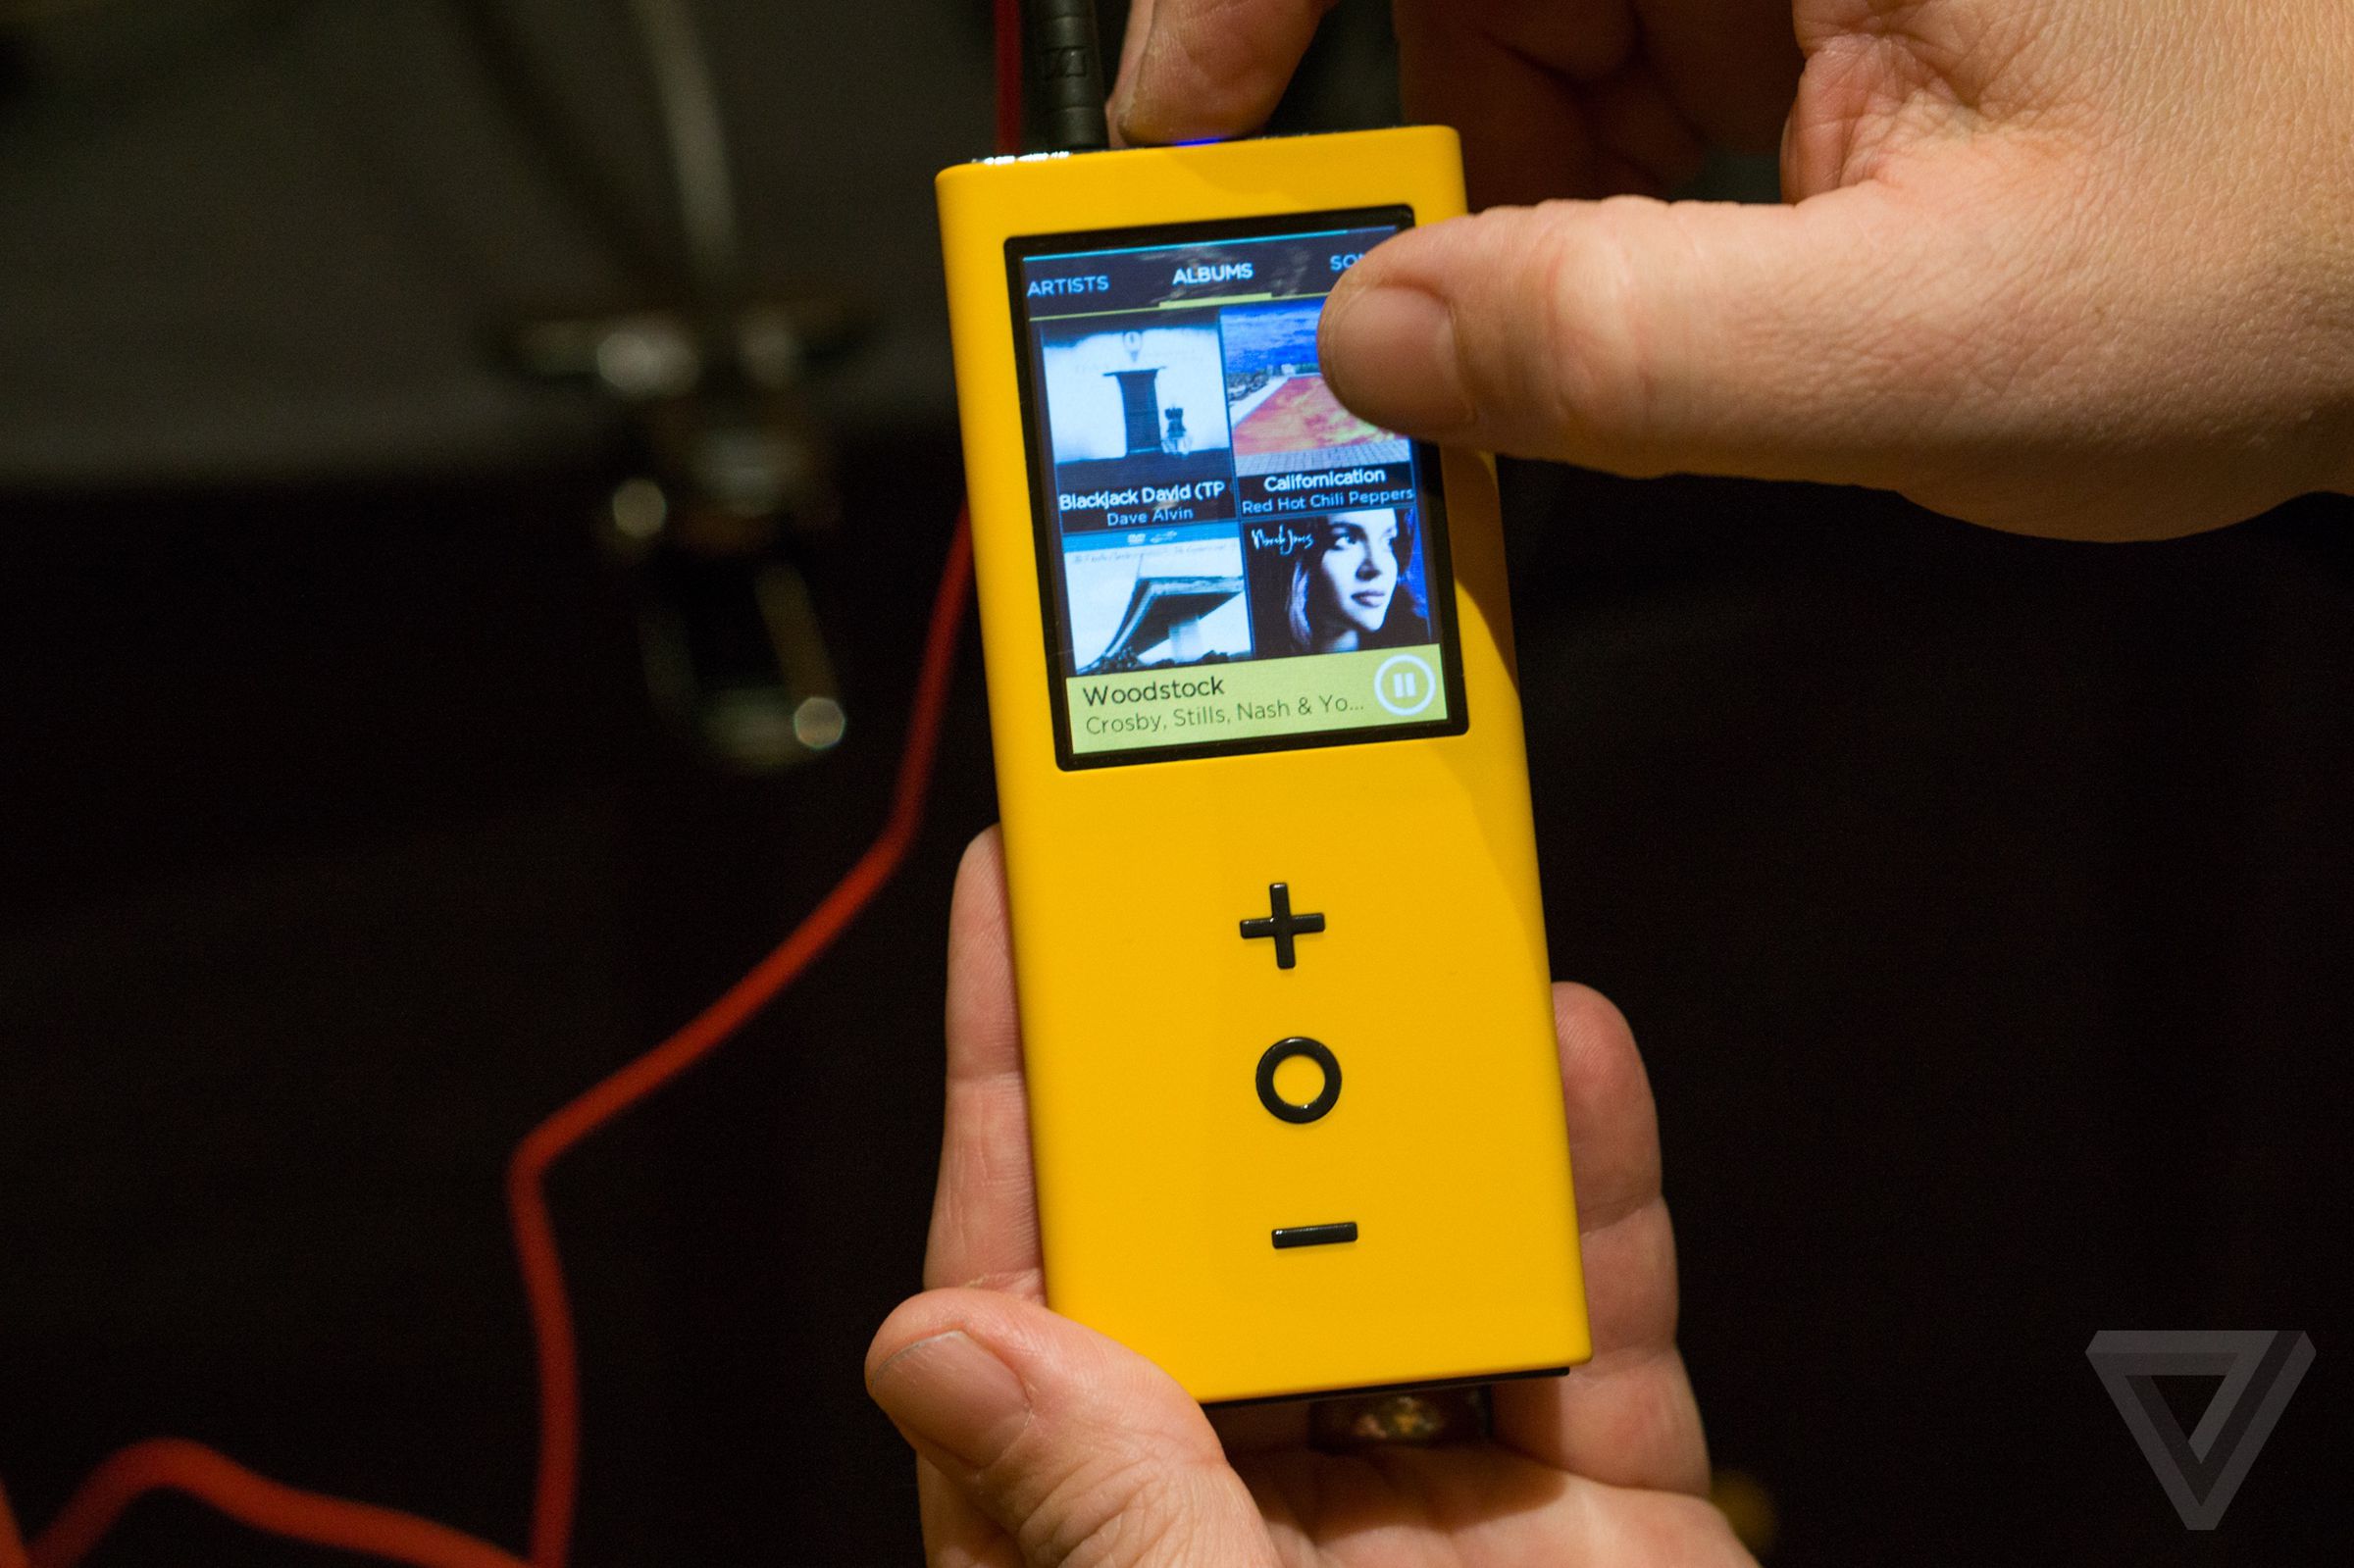 Pono music player hands-on photos